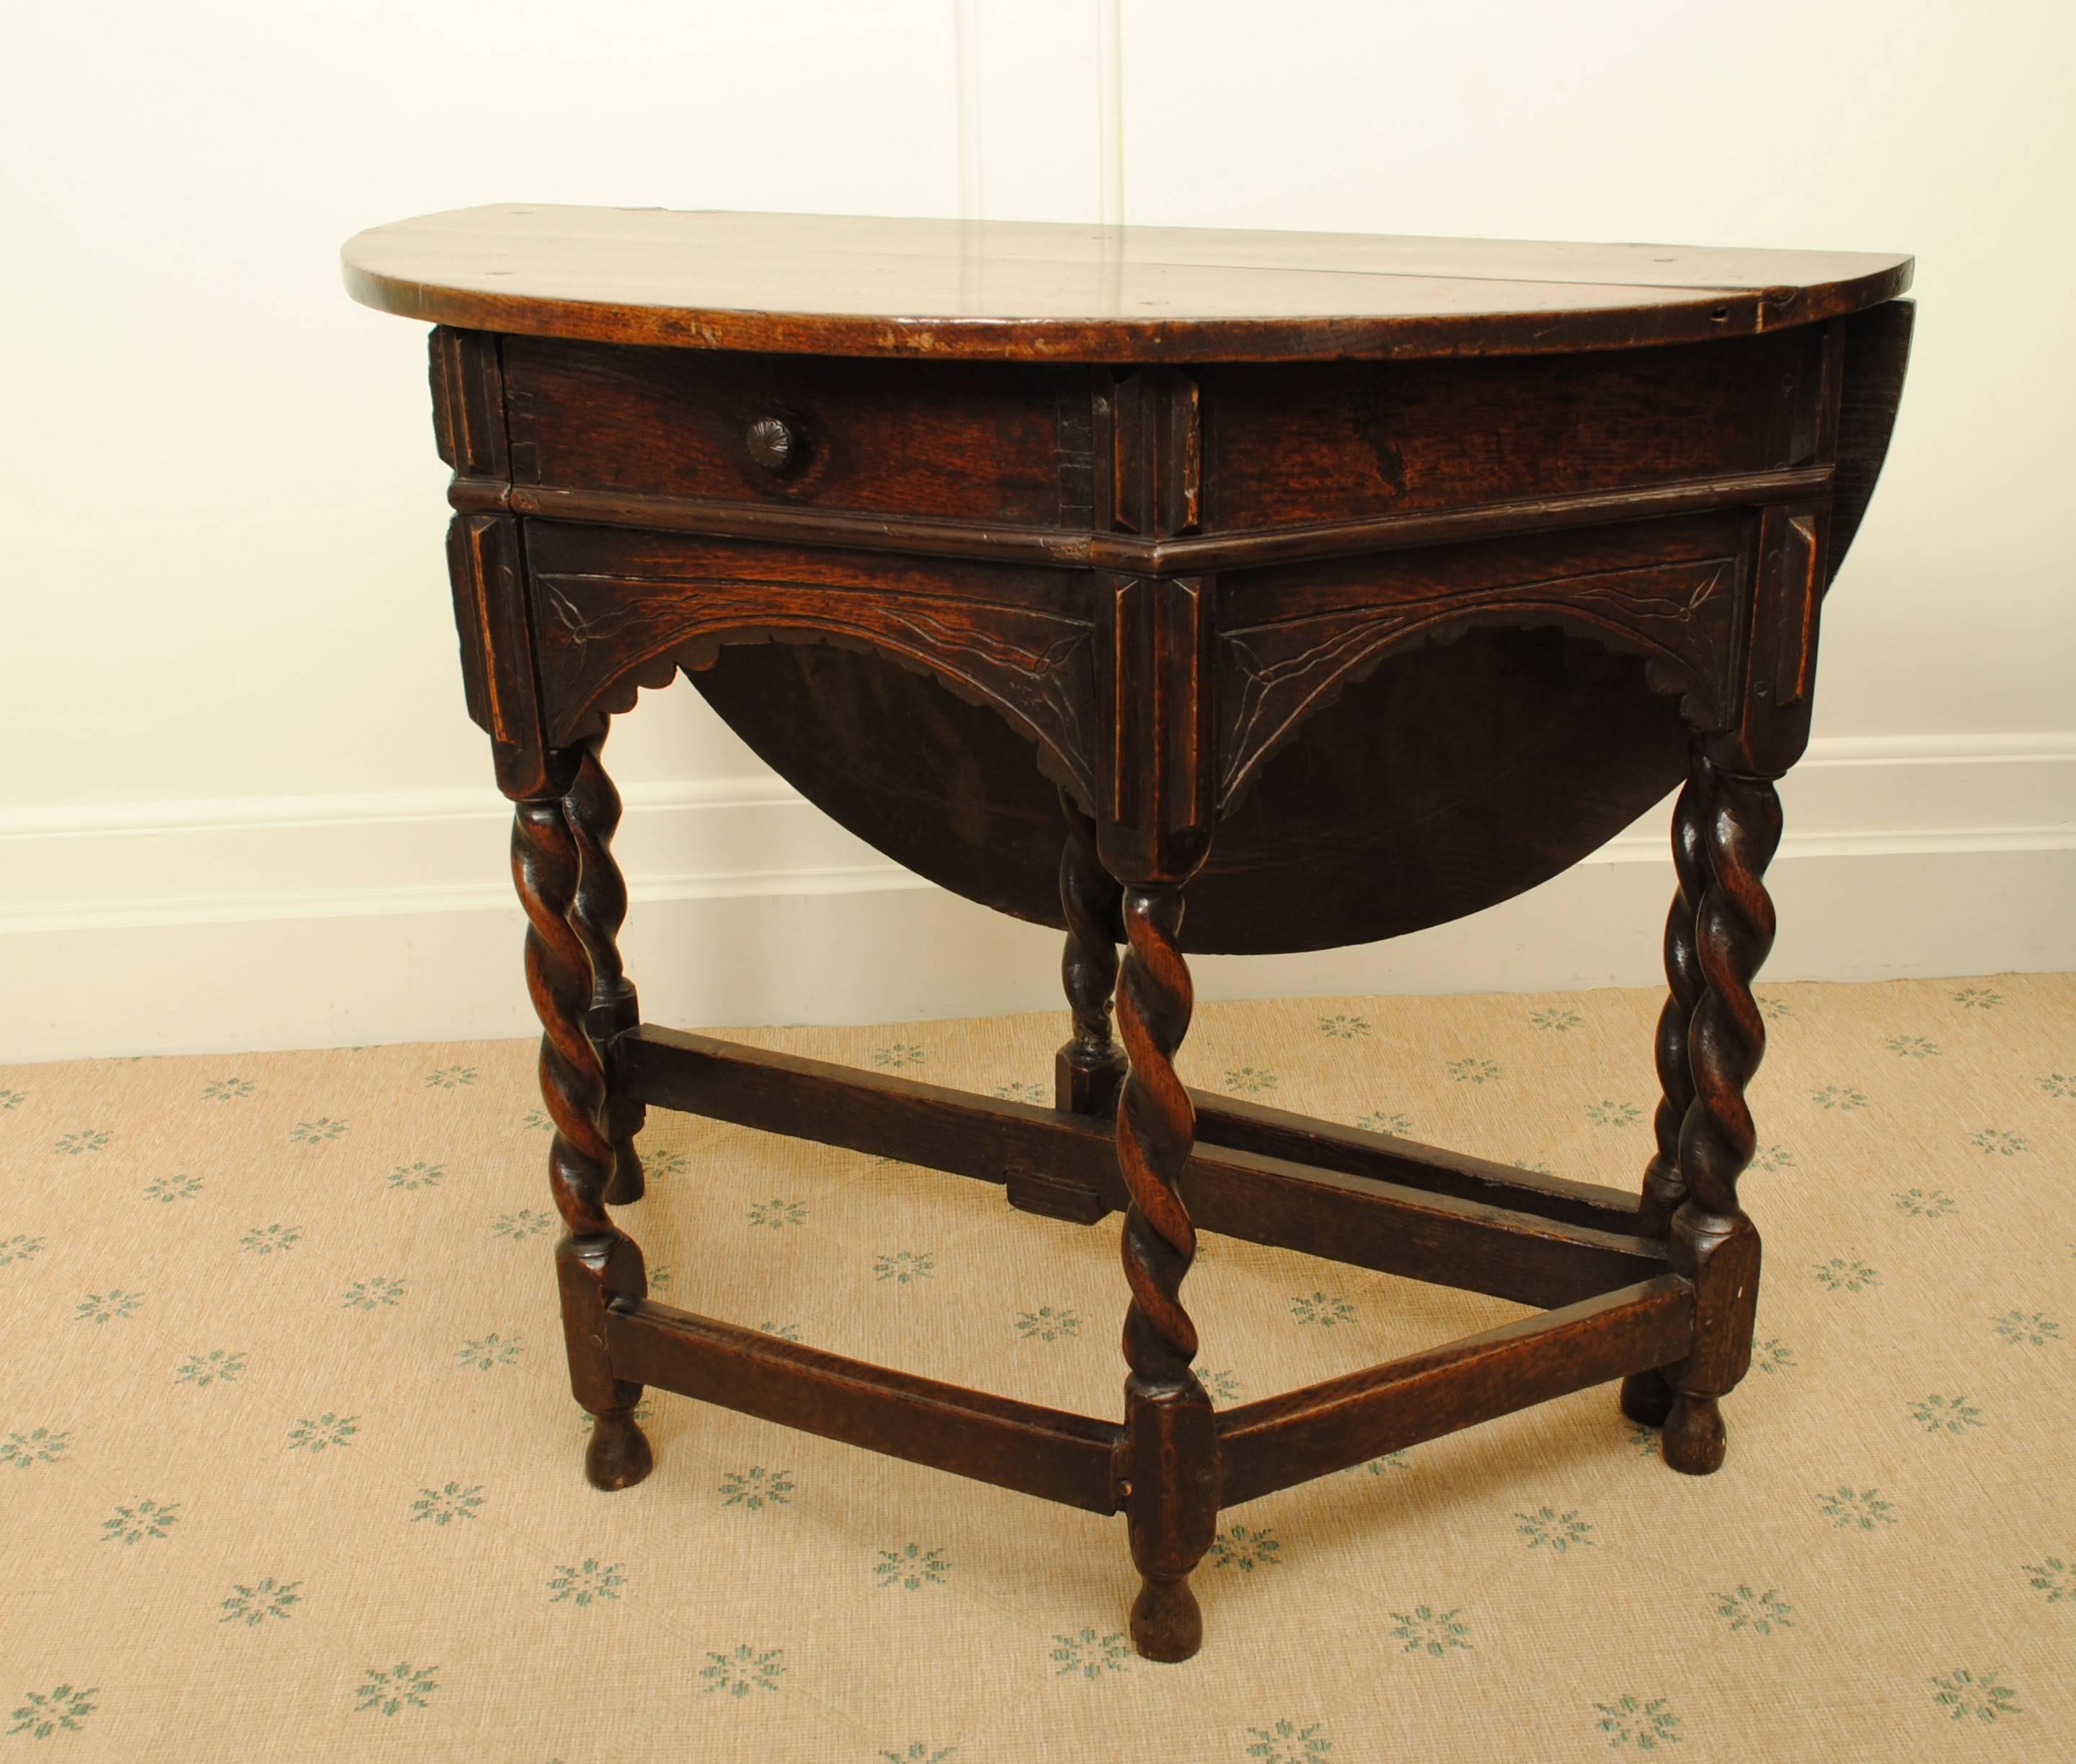 A 17th century oak credence table of good colour.